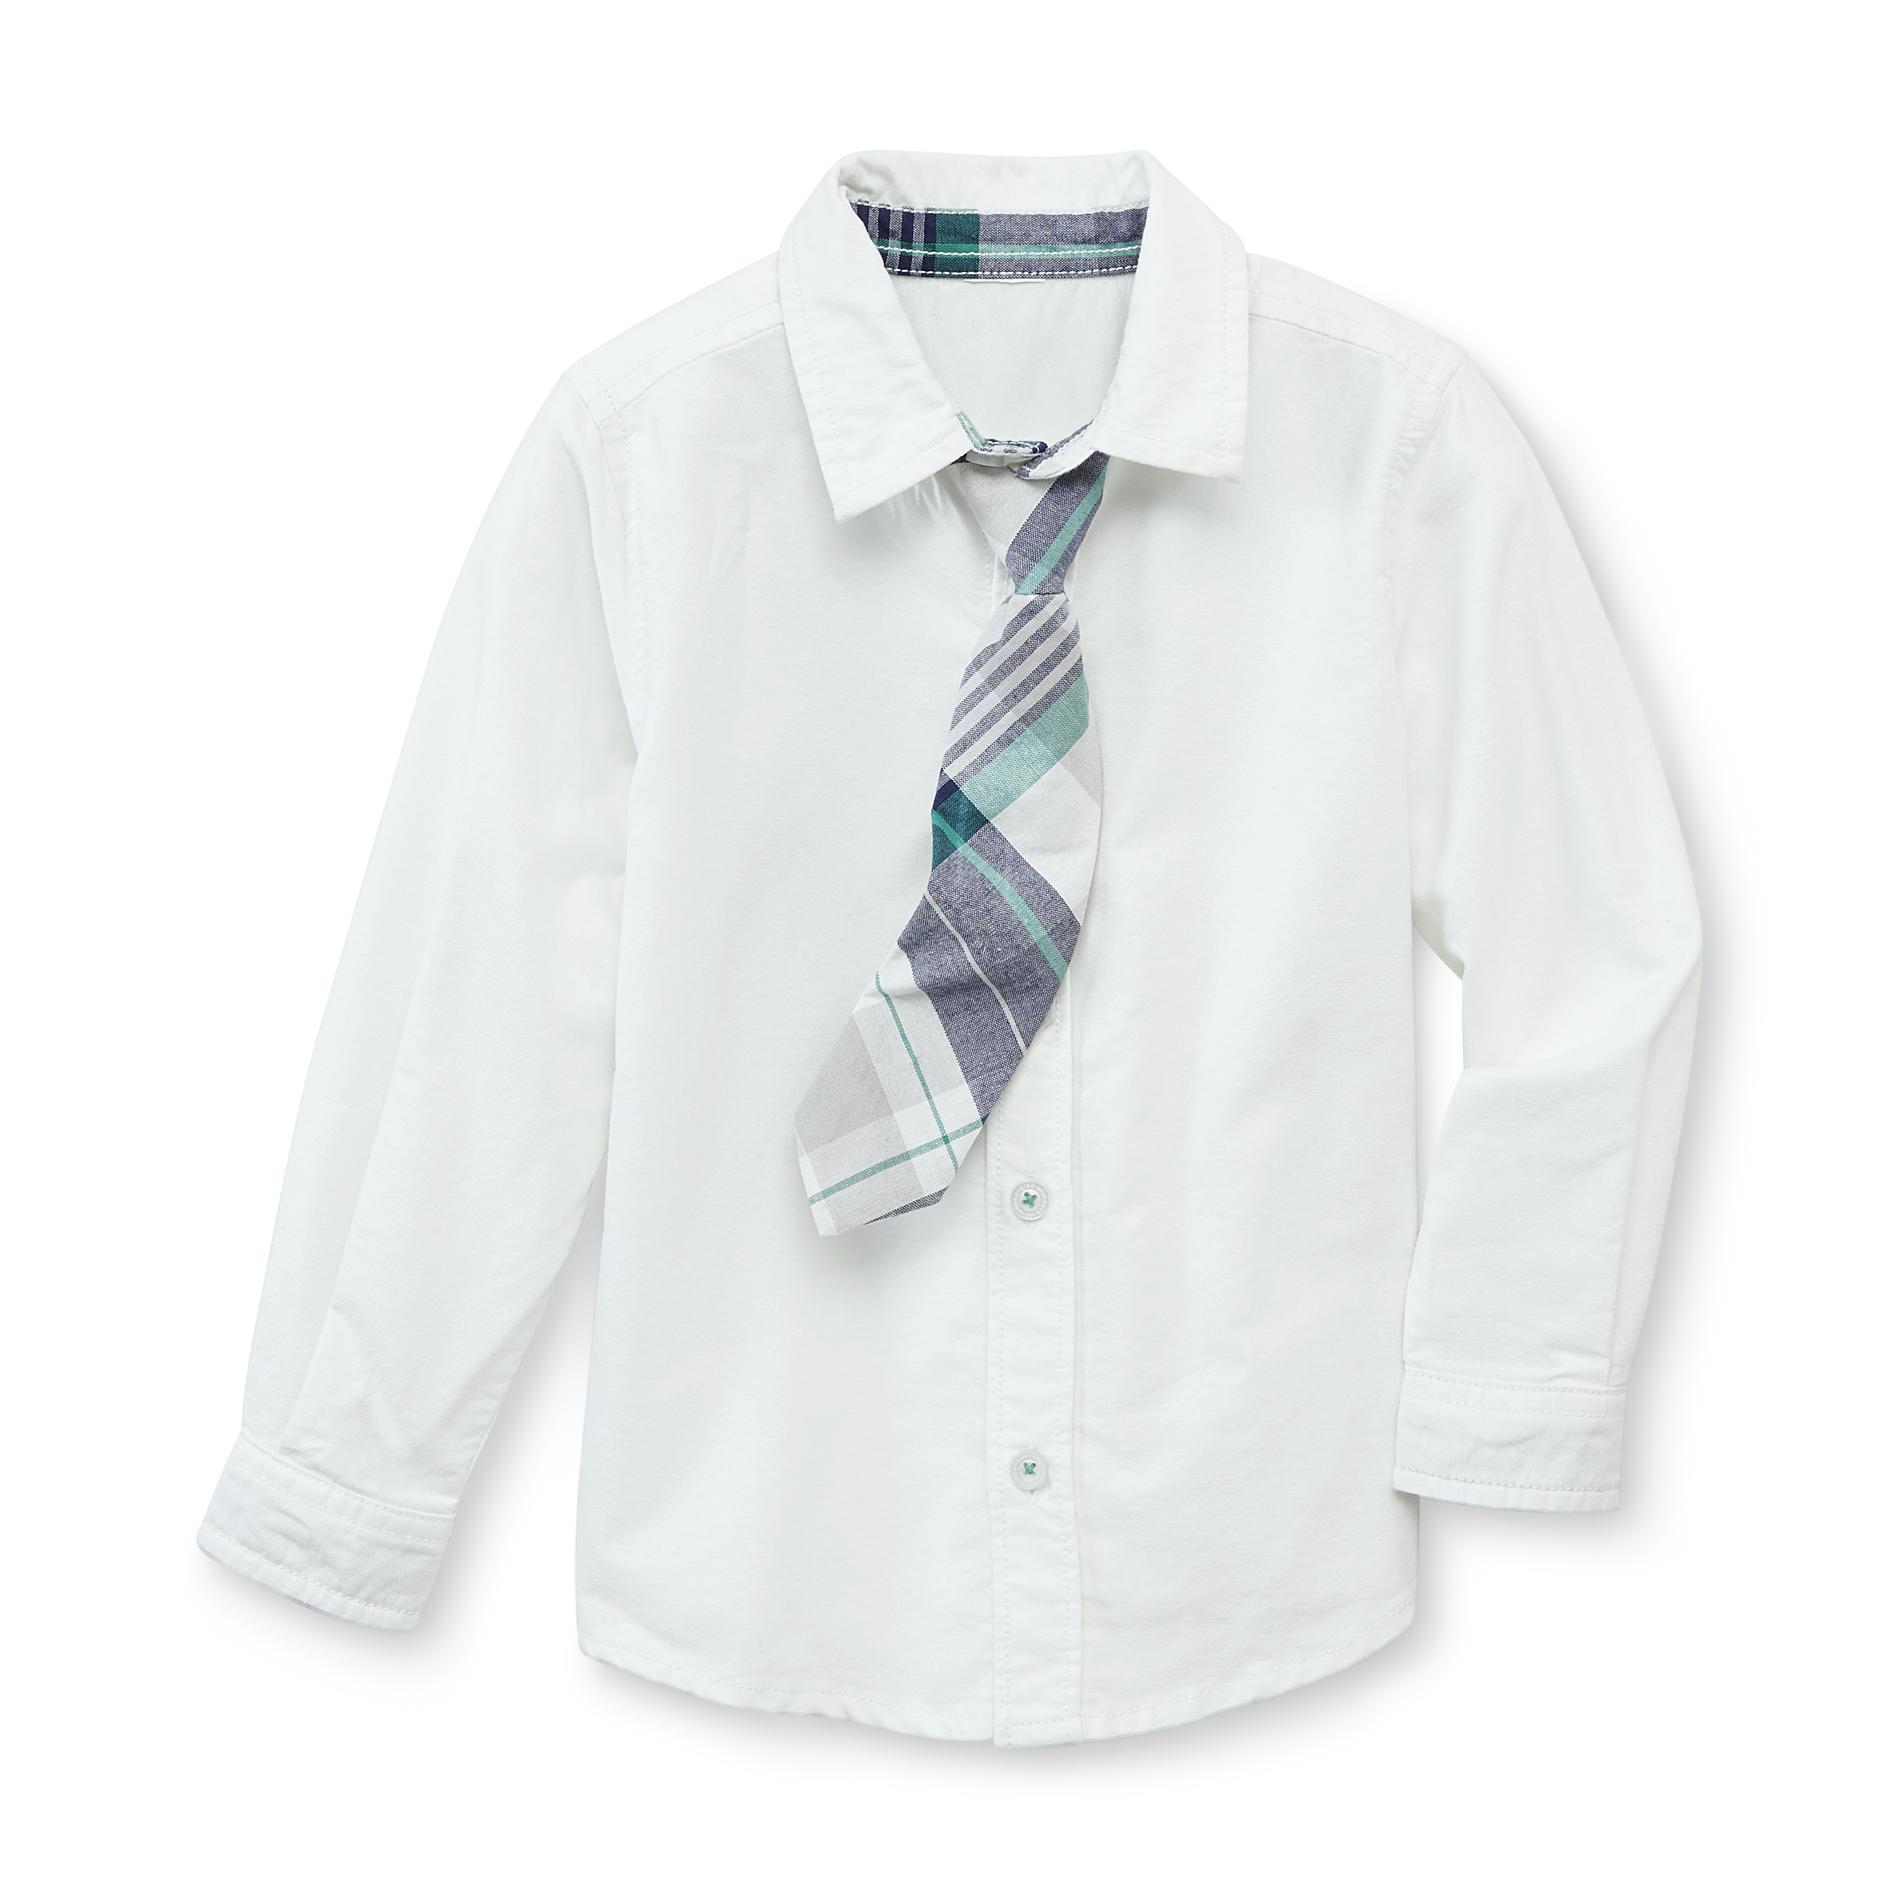 Holiday Editions Infant & Toddler Boy's Oxford Shirt & Clip-On Necktie